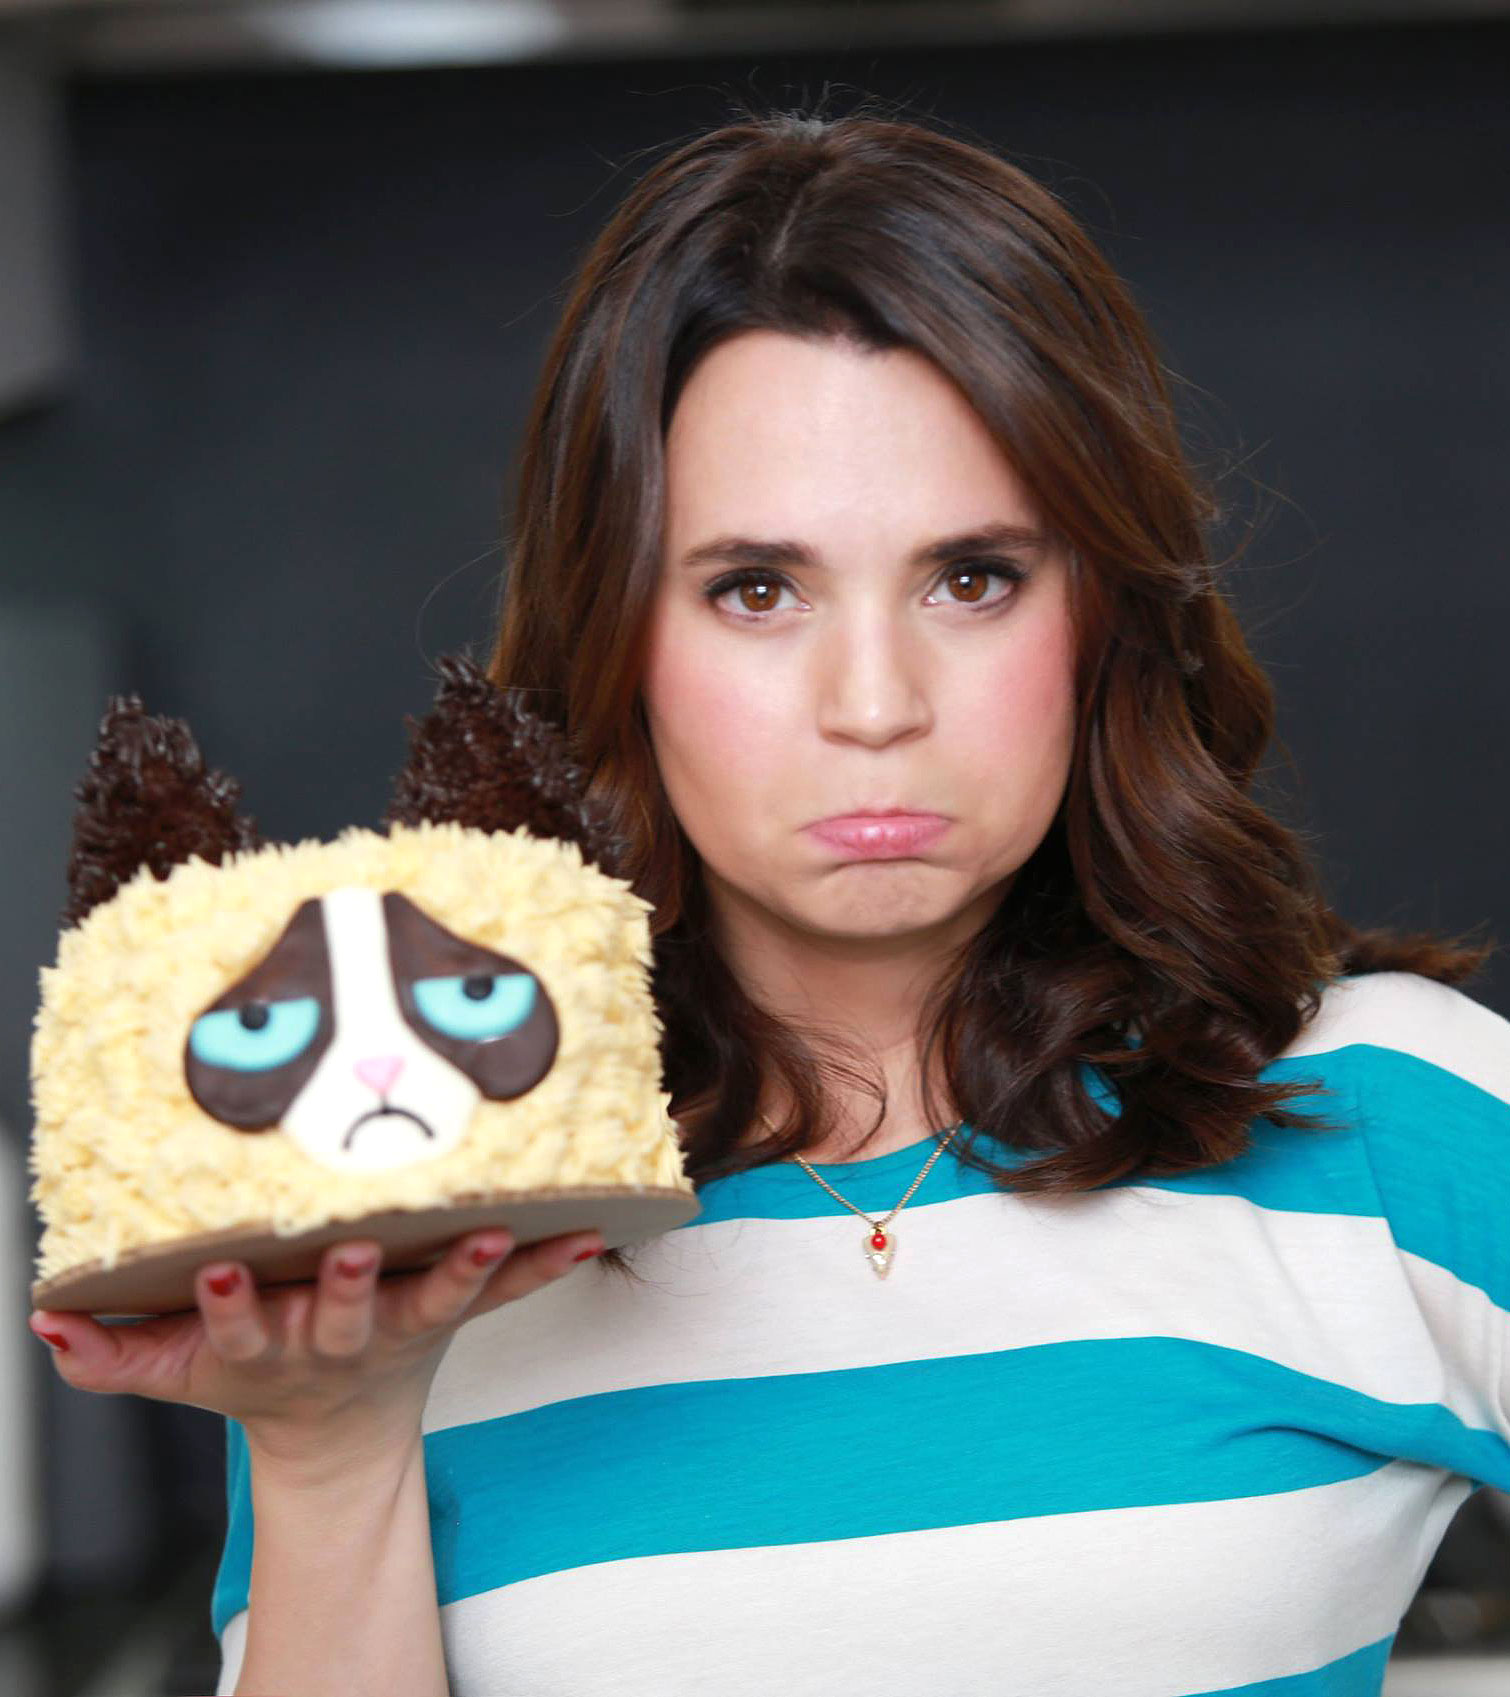 Rosanna Pansino and her cakes